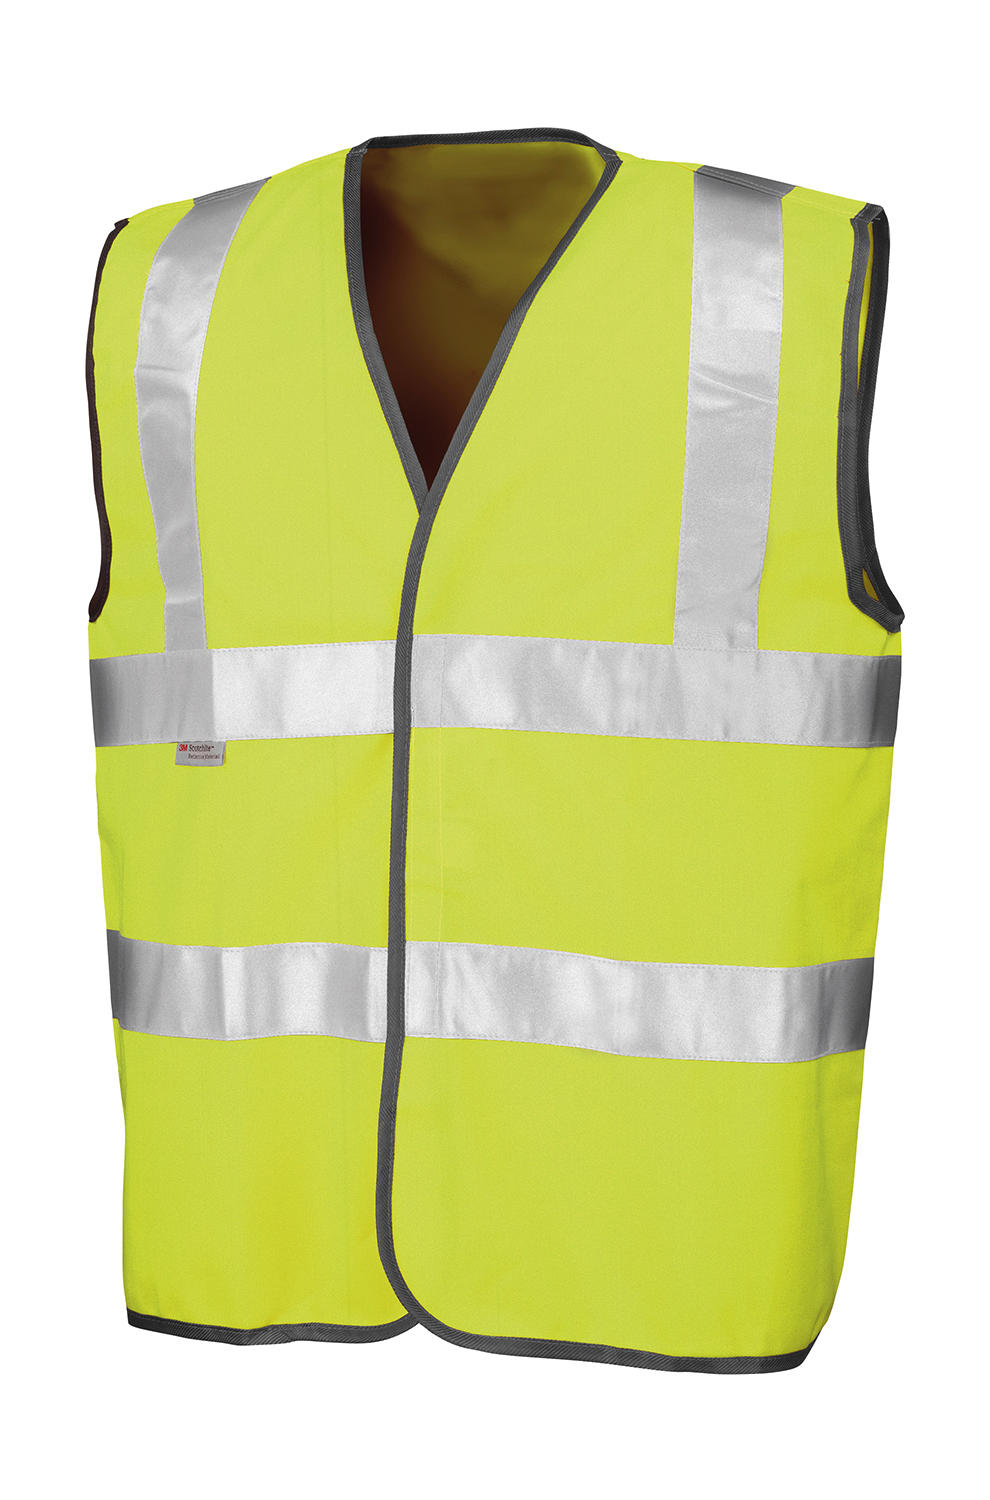  Safety Hi-Vis Vest in Farbe Fluorescent Yellow